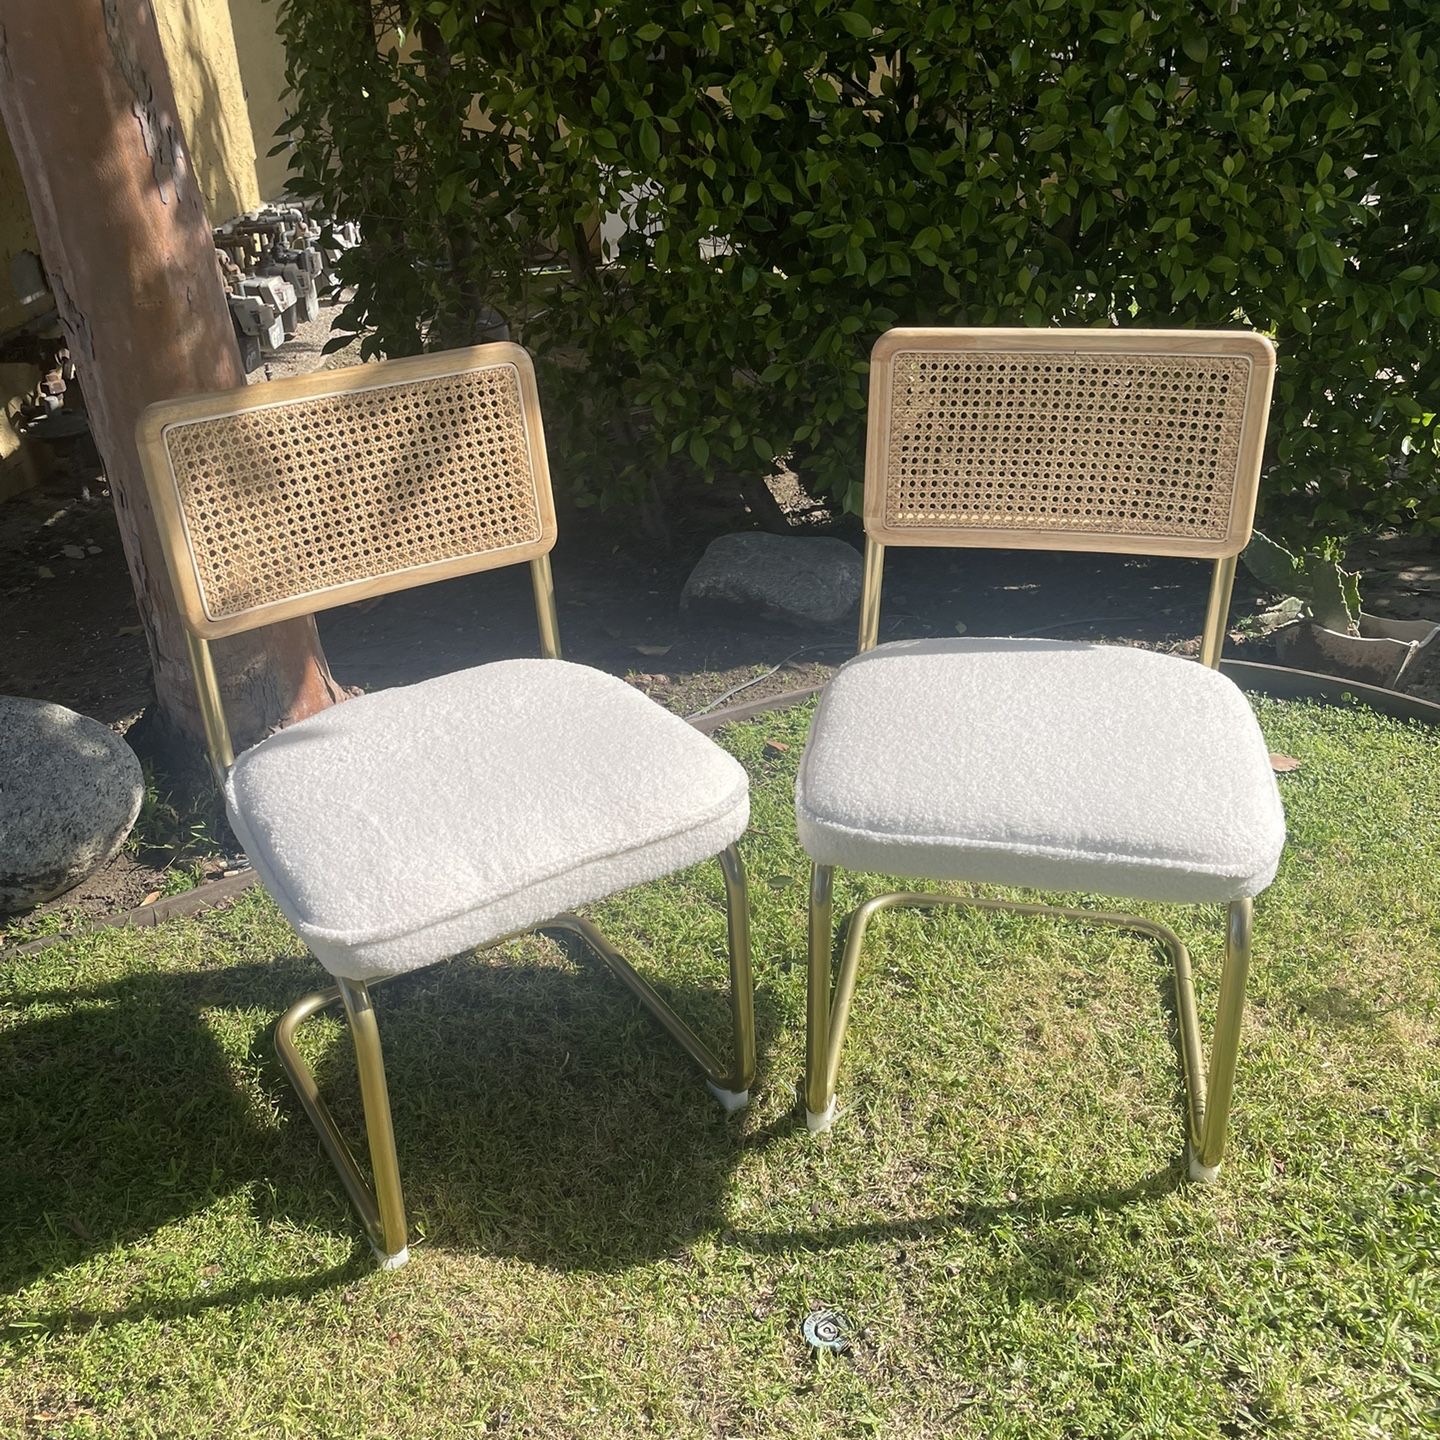 Mid-Century Modern, Natural Mesh Rattan Backrest, Upholstered Fleece Seat Armless Chairs with Metal Legs for Home Kitchen Dining Room, Set of 2, White